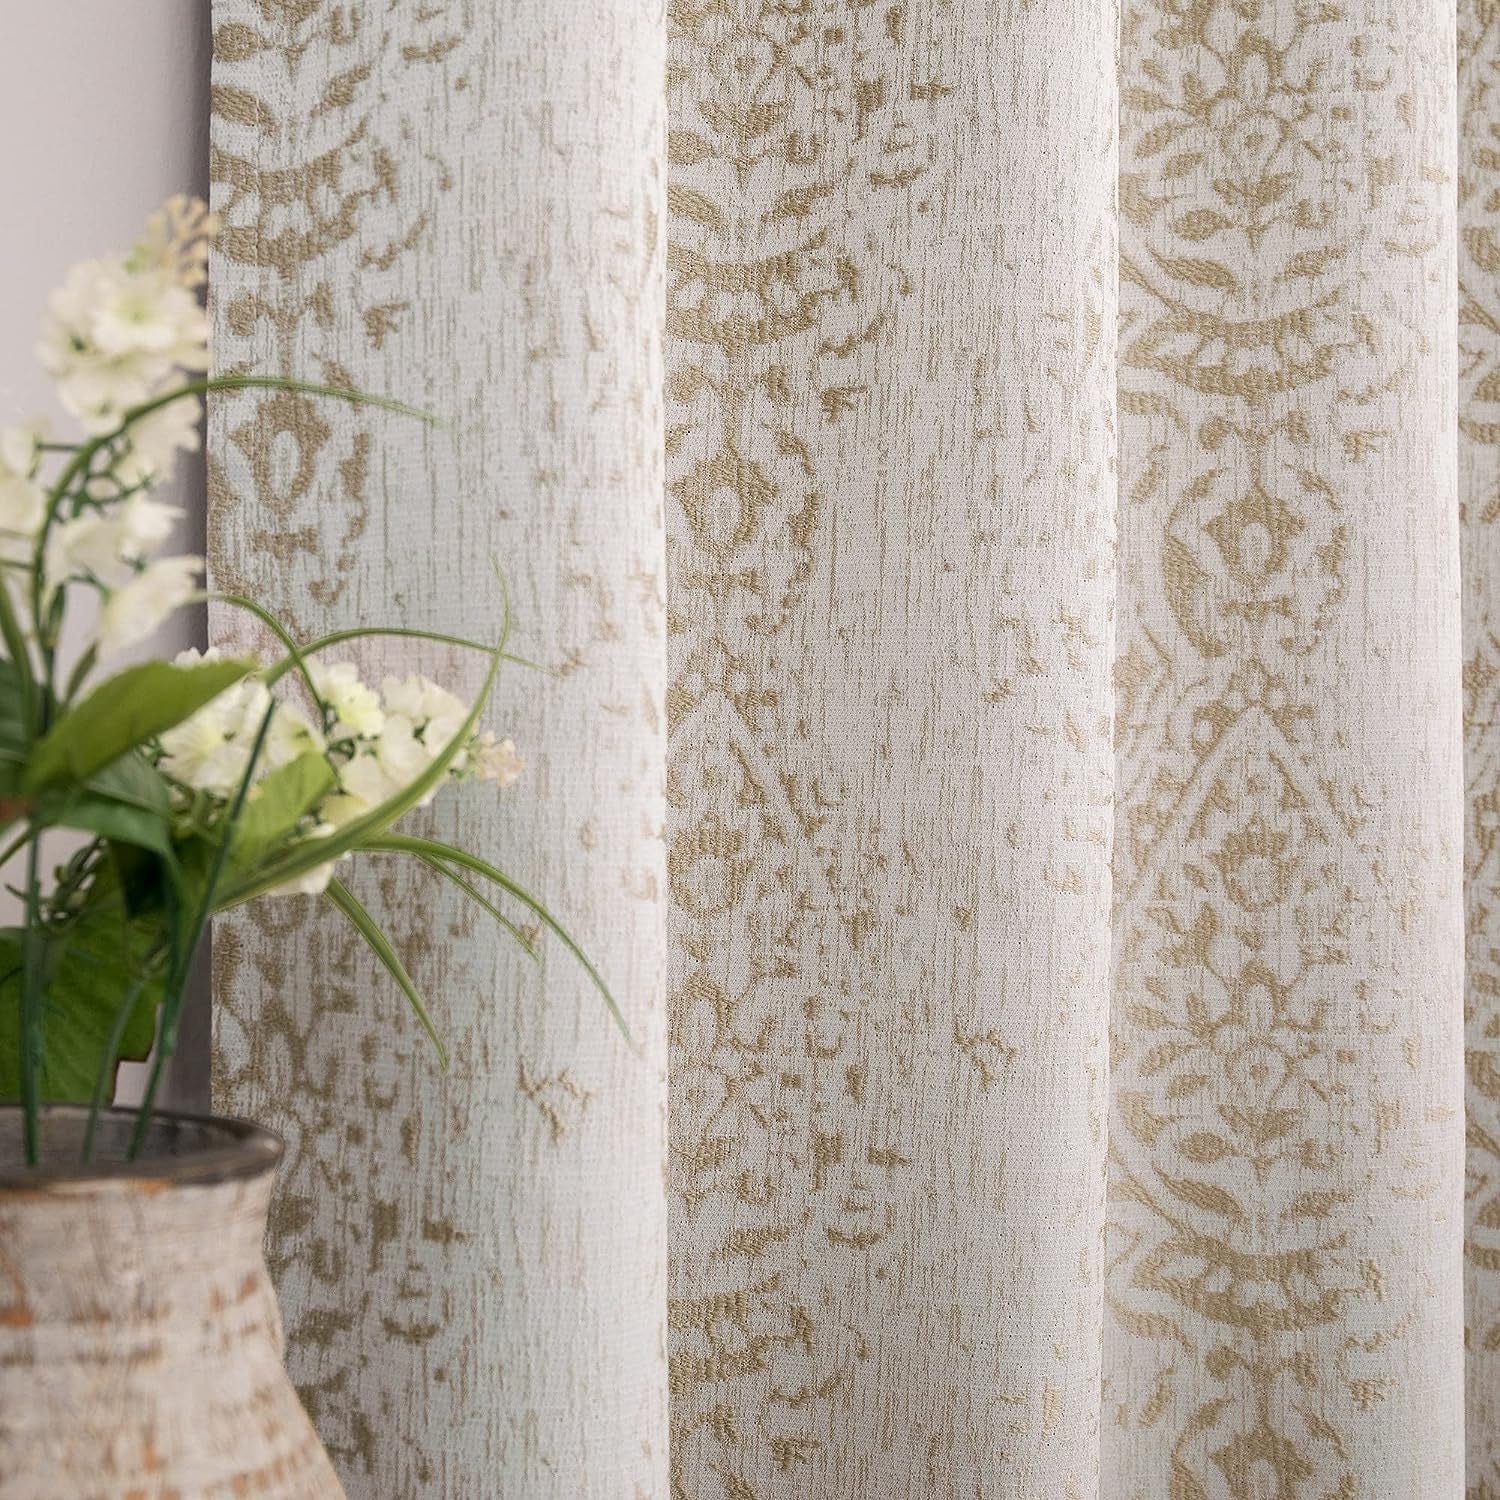 Off White Curtains 84 Inches Long for Bedroom Grommet Tone on Tone Design 3D Jacquard Embossed Damask Moroccan Pattern 50% Blackout Drapes for Living Room 84 Inch Length 2 Panels Set Cream  MRS.NATURALL TEXTILE Taupe 52X84 